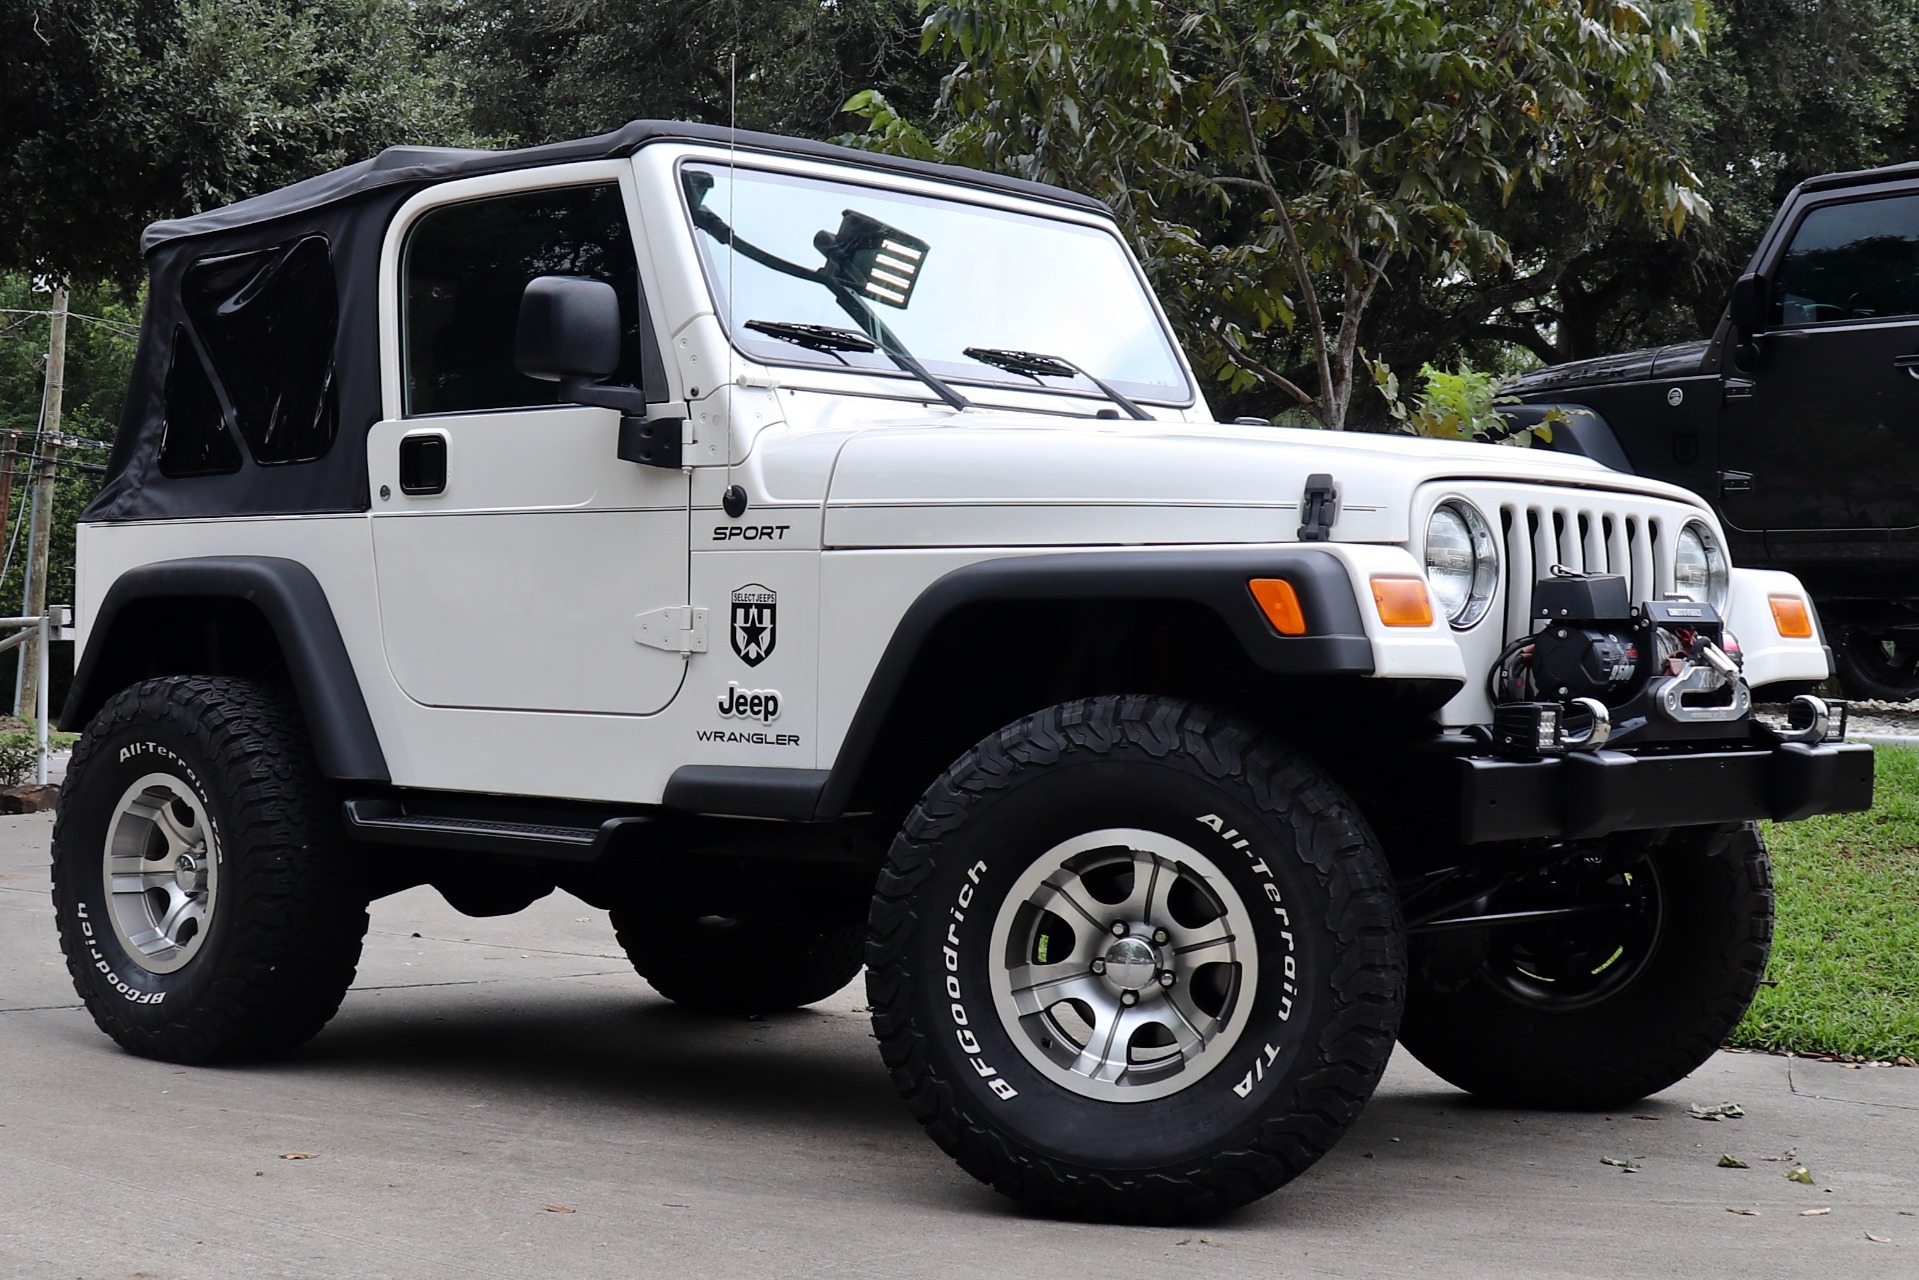 Used 2005 Jeep Wrangler Sport For Sale ($22,995) | Select Jeeps Inc. Stock  #343398